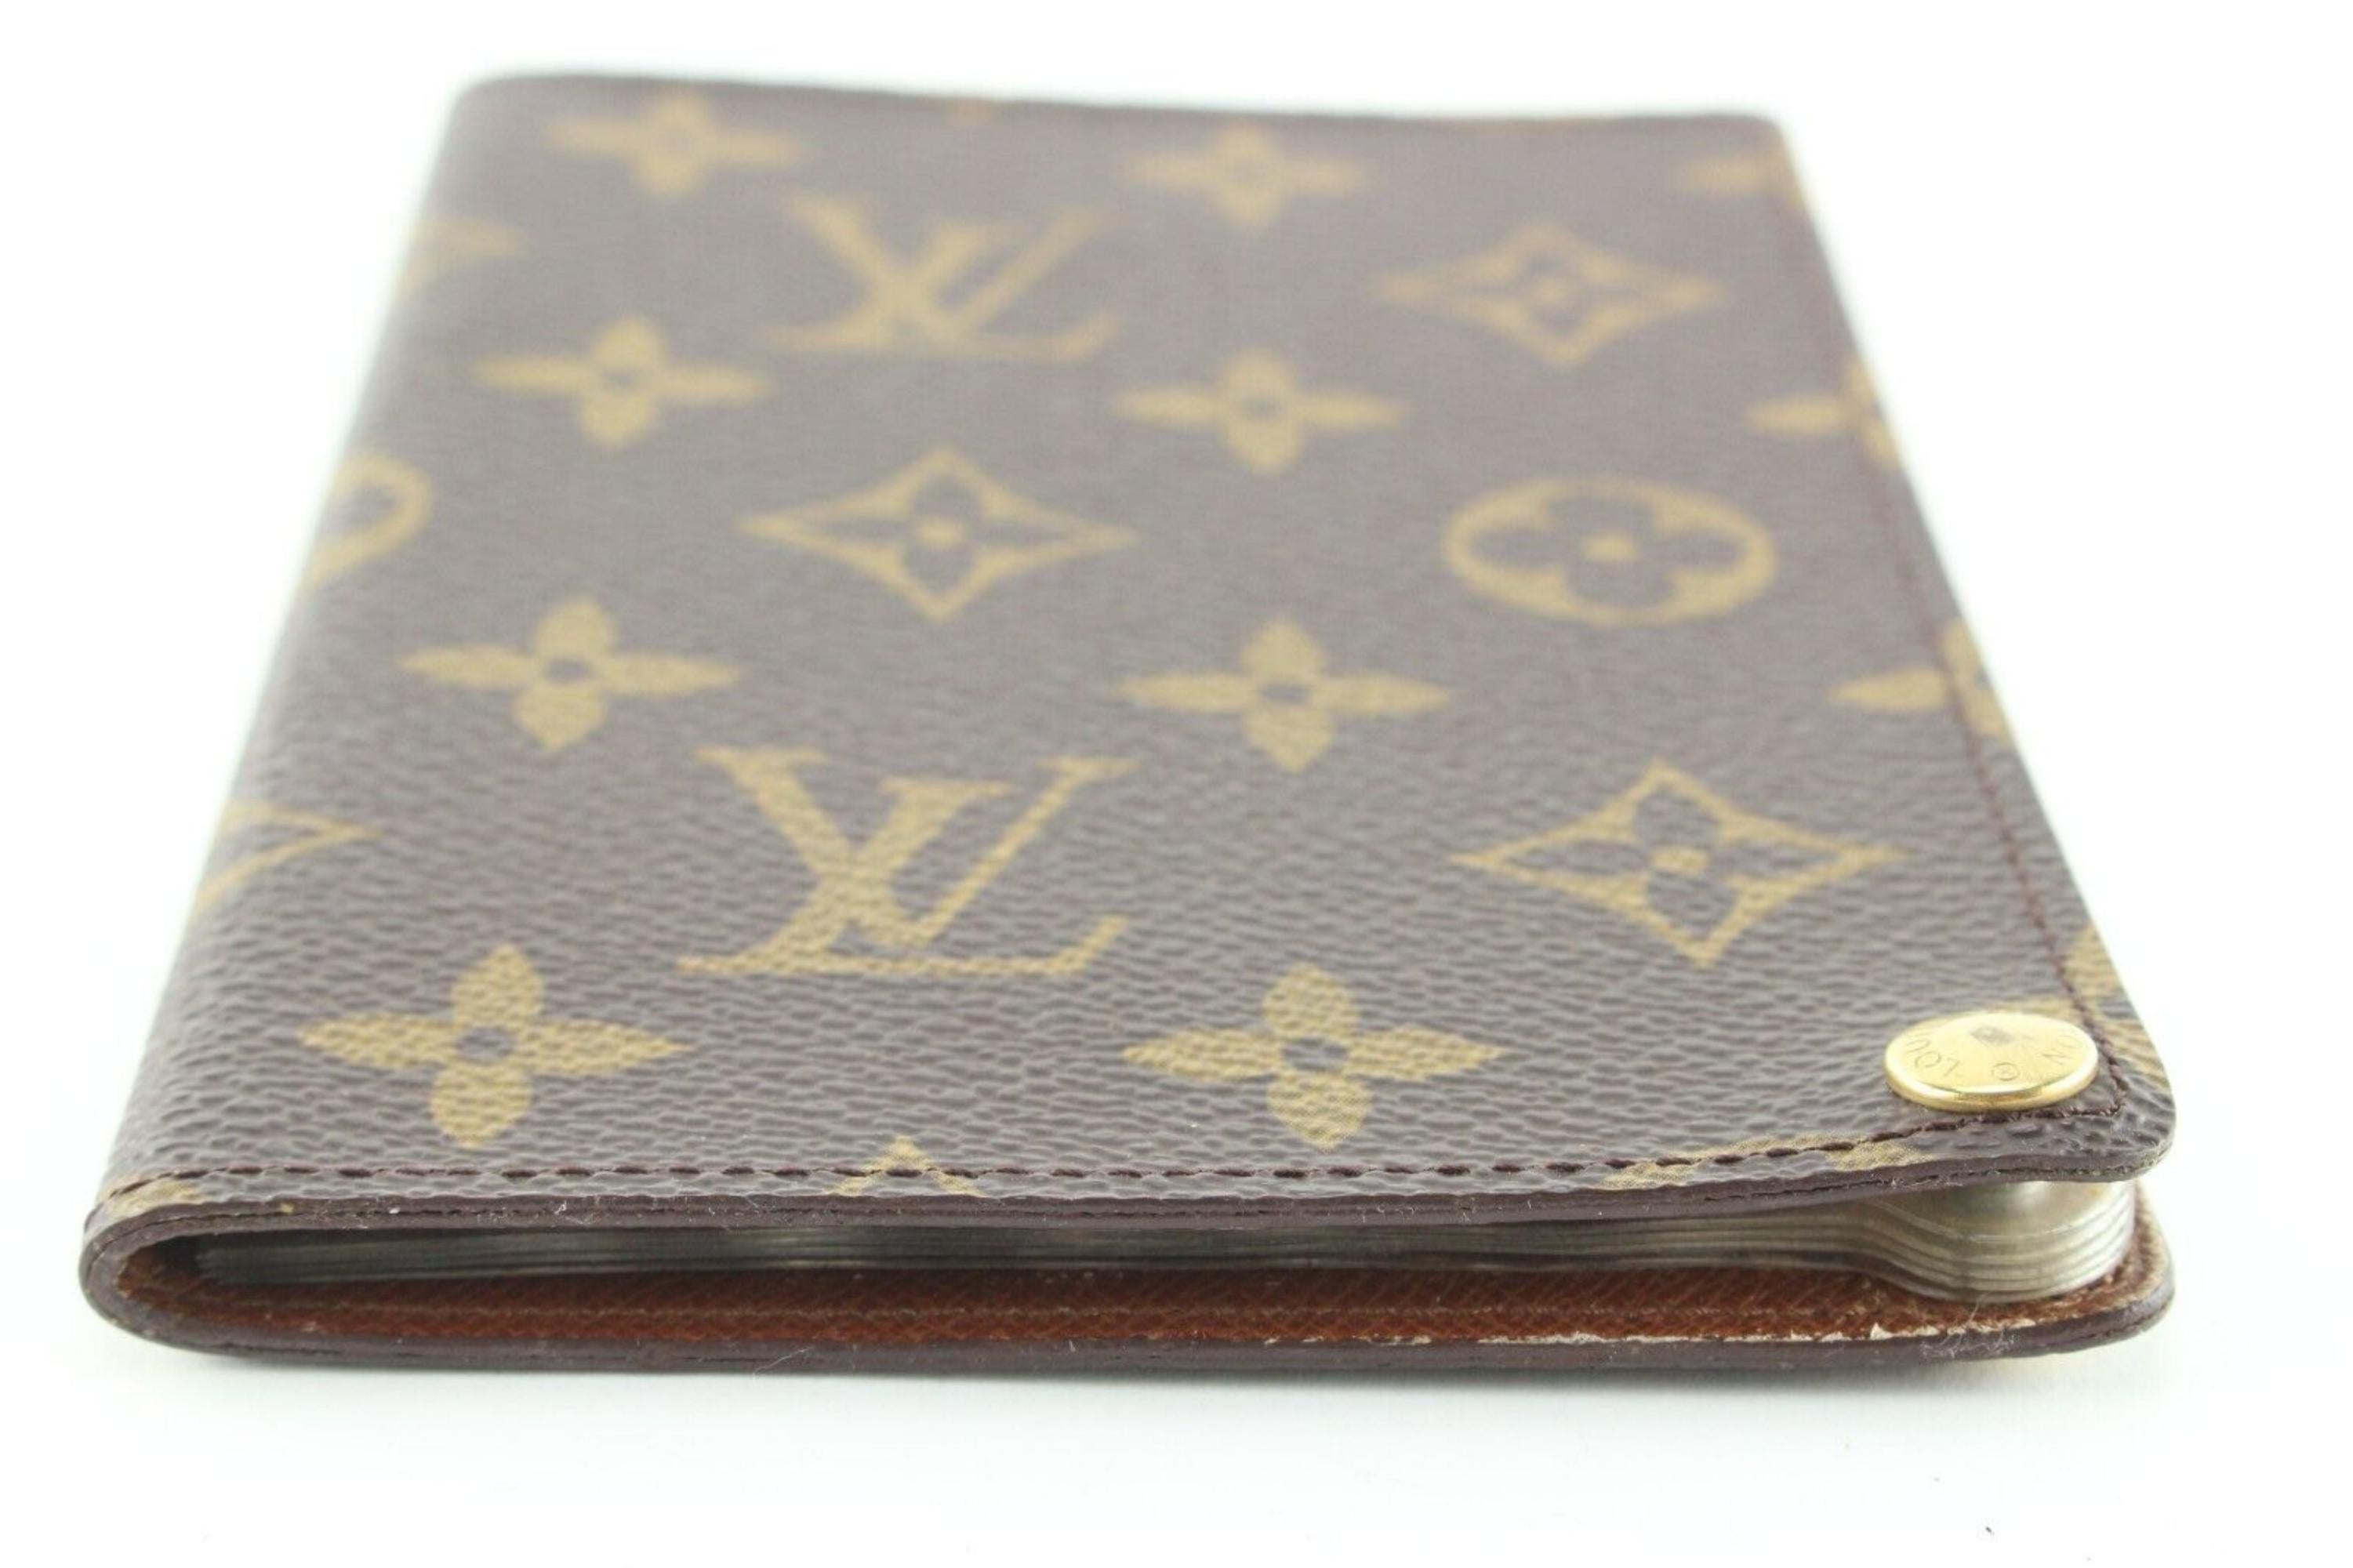 Louis Vuitton Monogram Photo Album 2LV0509 In Good Condition For Sale In Dix hills, NY